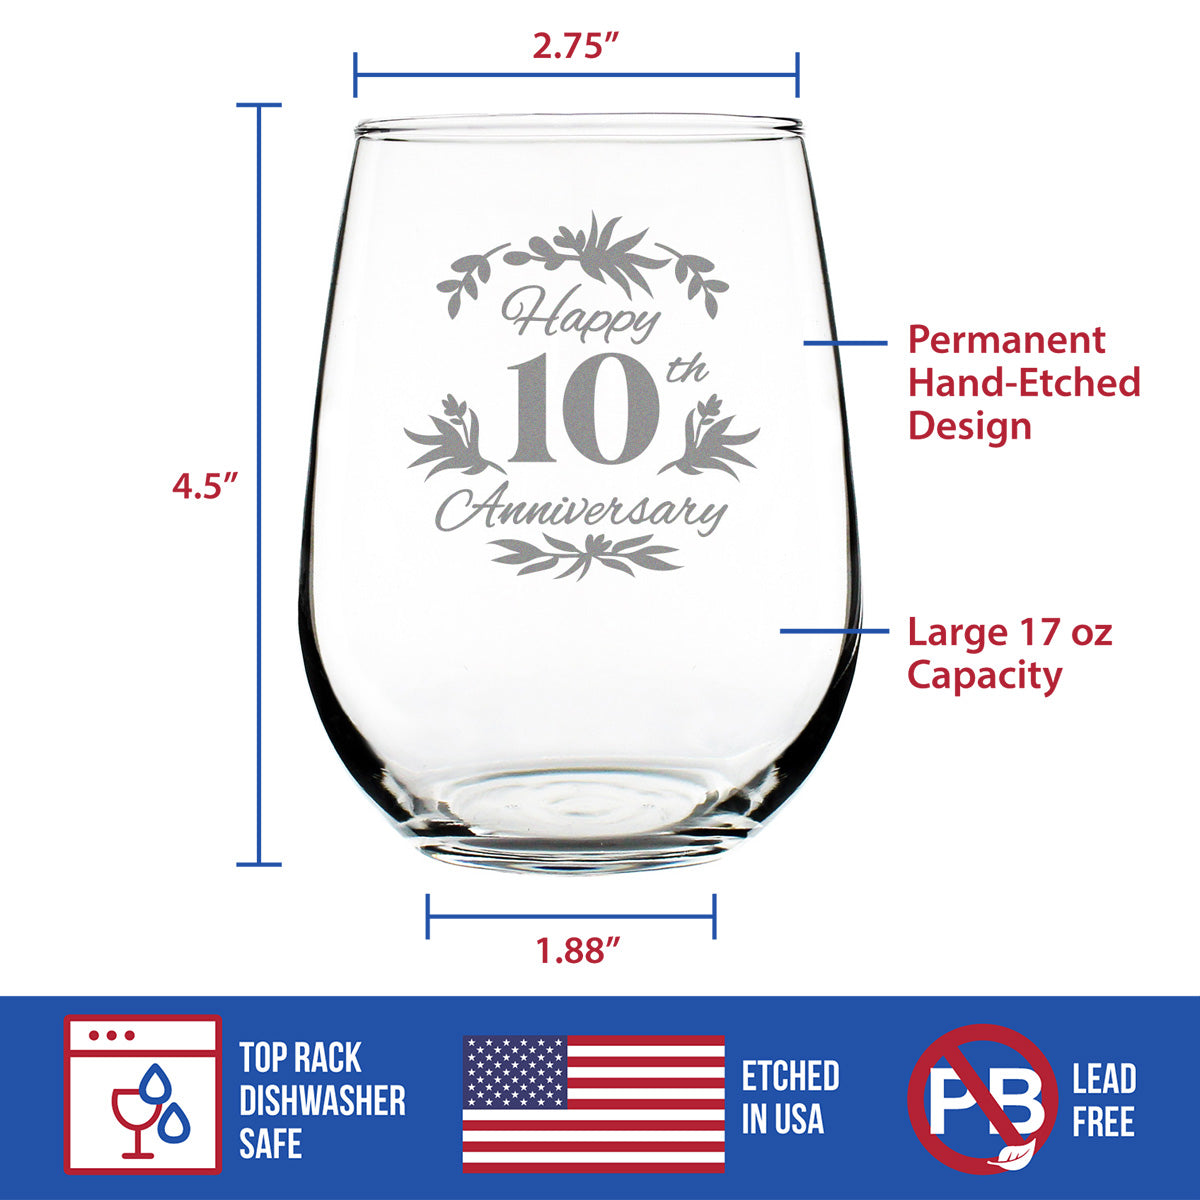 Happy 10th Anniversary - Stemless Wine Glass Gifts for Women &amp; Men - 10 Year Anniversary Party Decor - Large Glasses